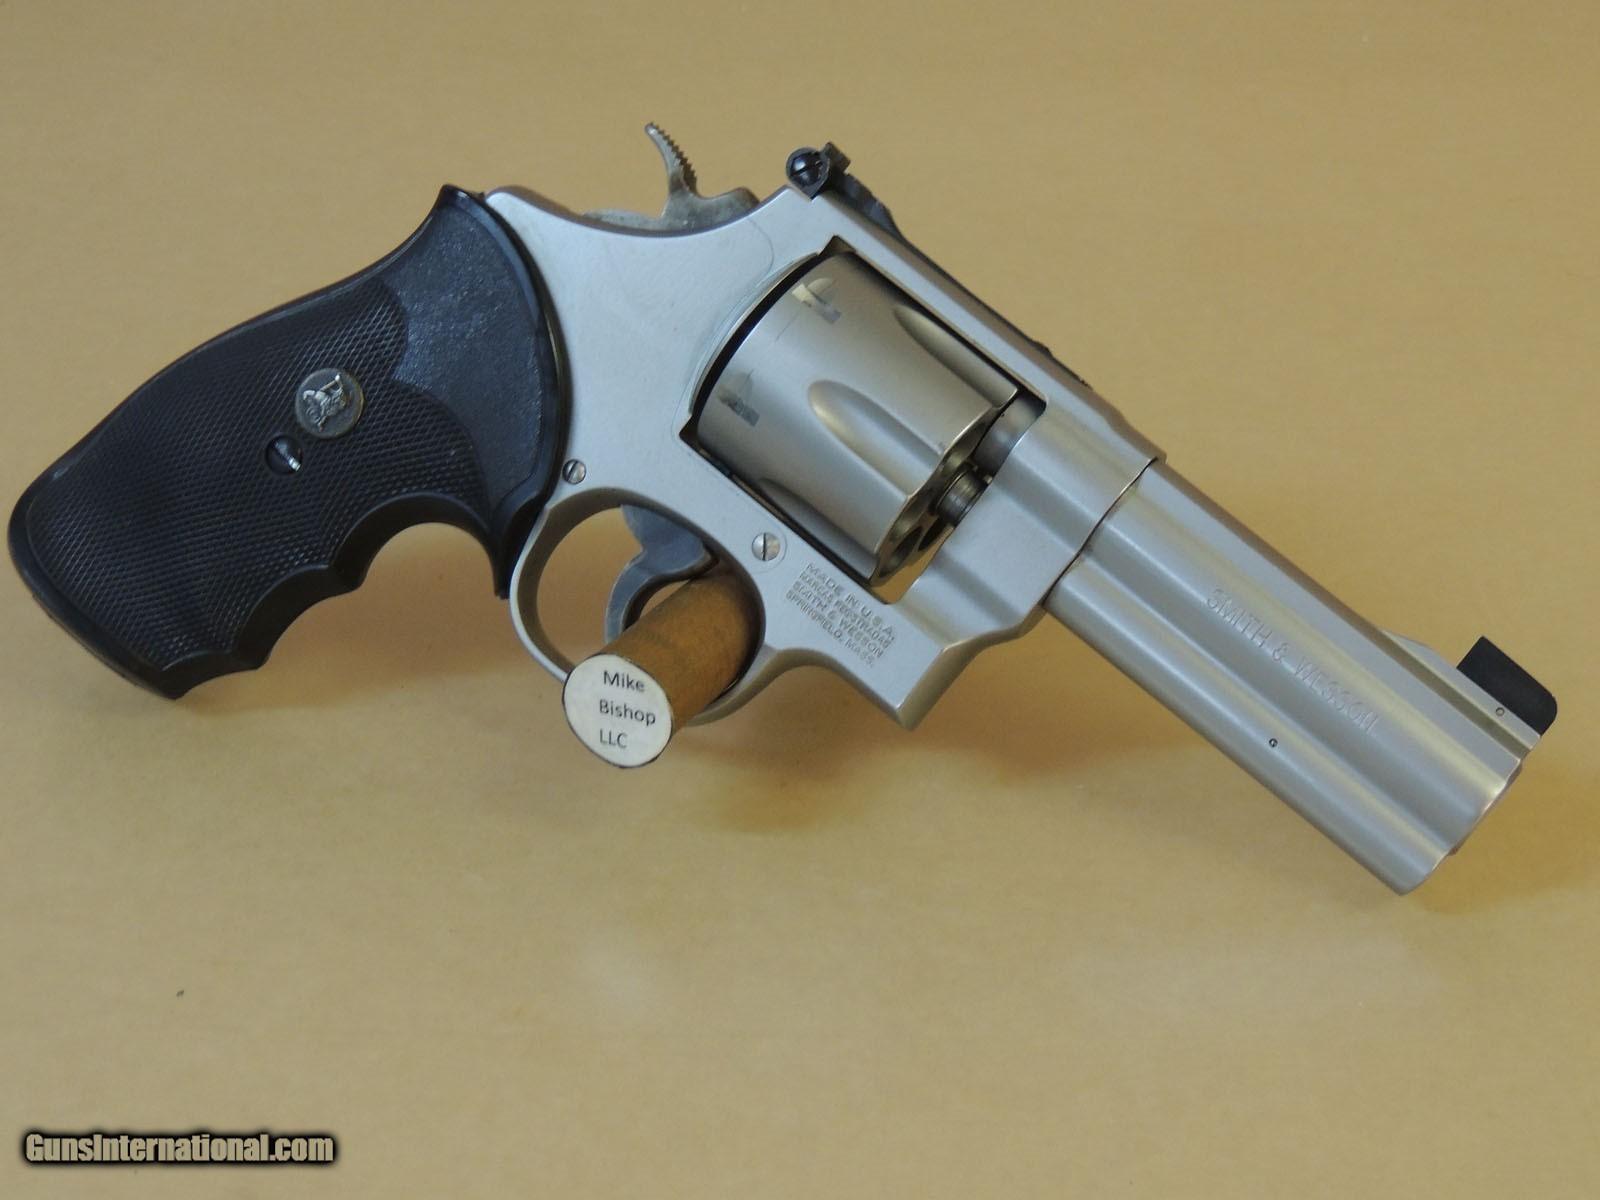 Smith & wesson model 625 - smith & wesson model 625 - qwe.wiki